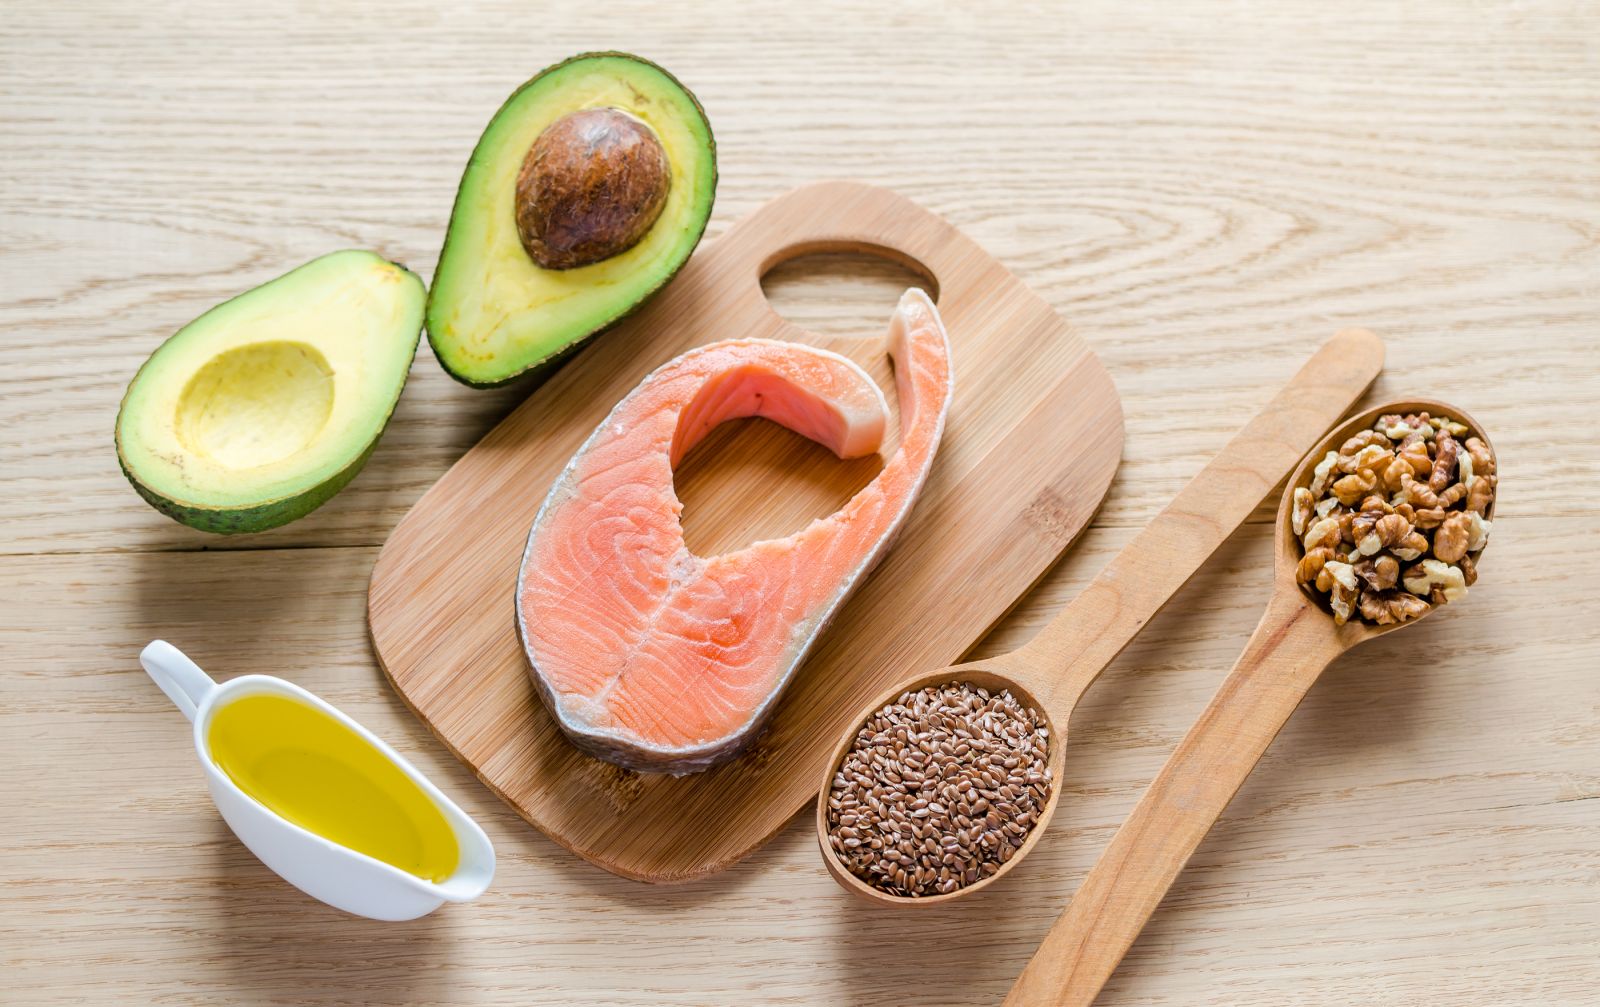 Good sources of monounsaturated and polysaturated fats are olive oil, peanut oil, canola oil, avocados, most nuts, high-oleic safflower and sunflower oils